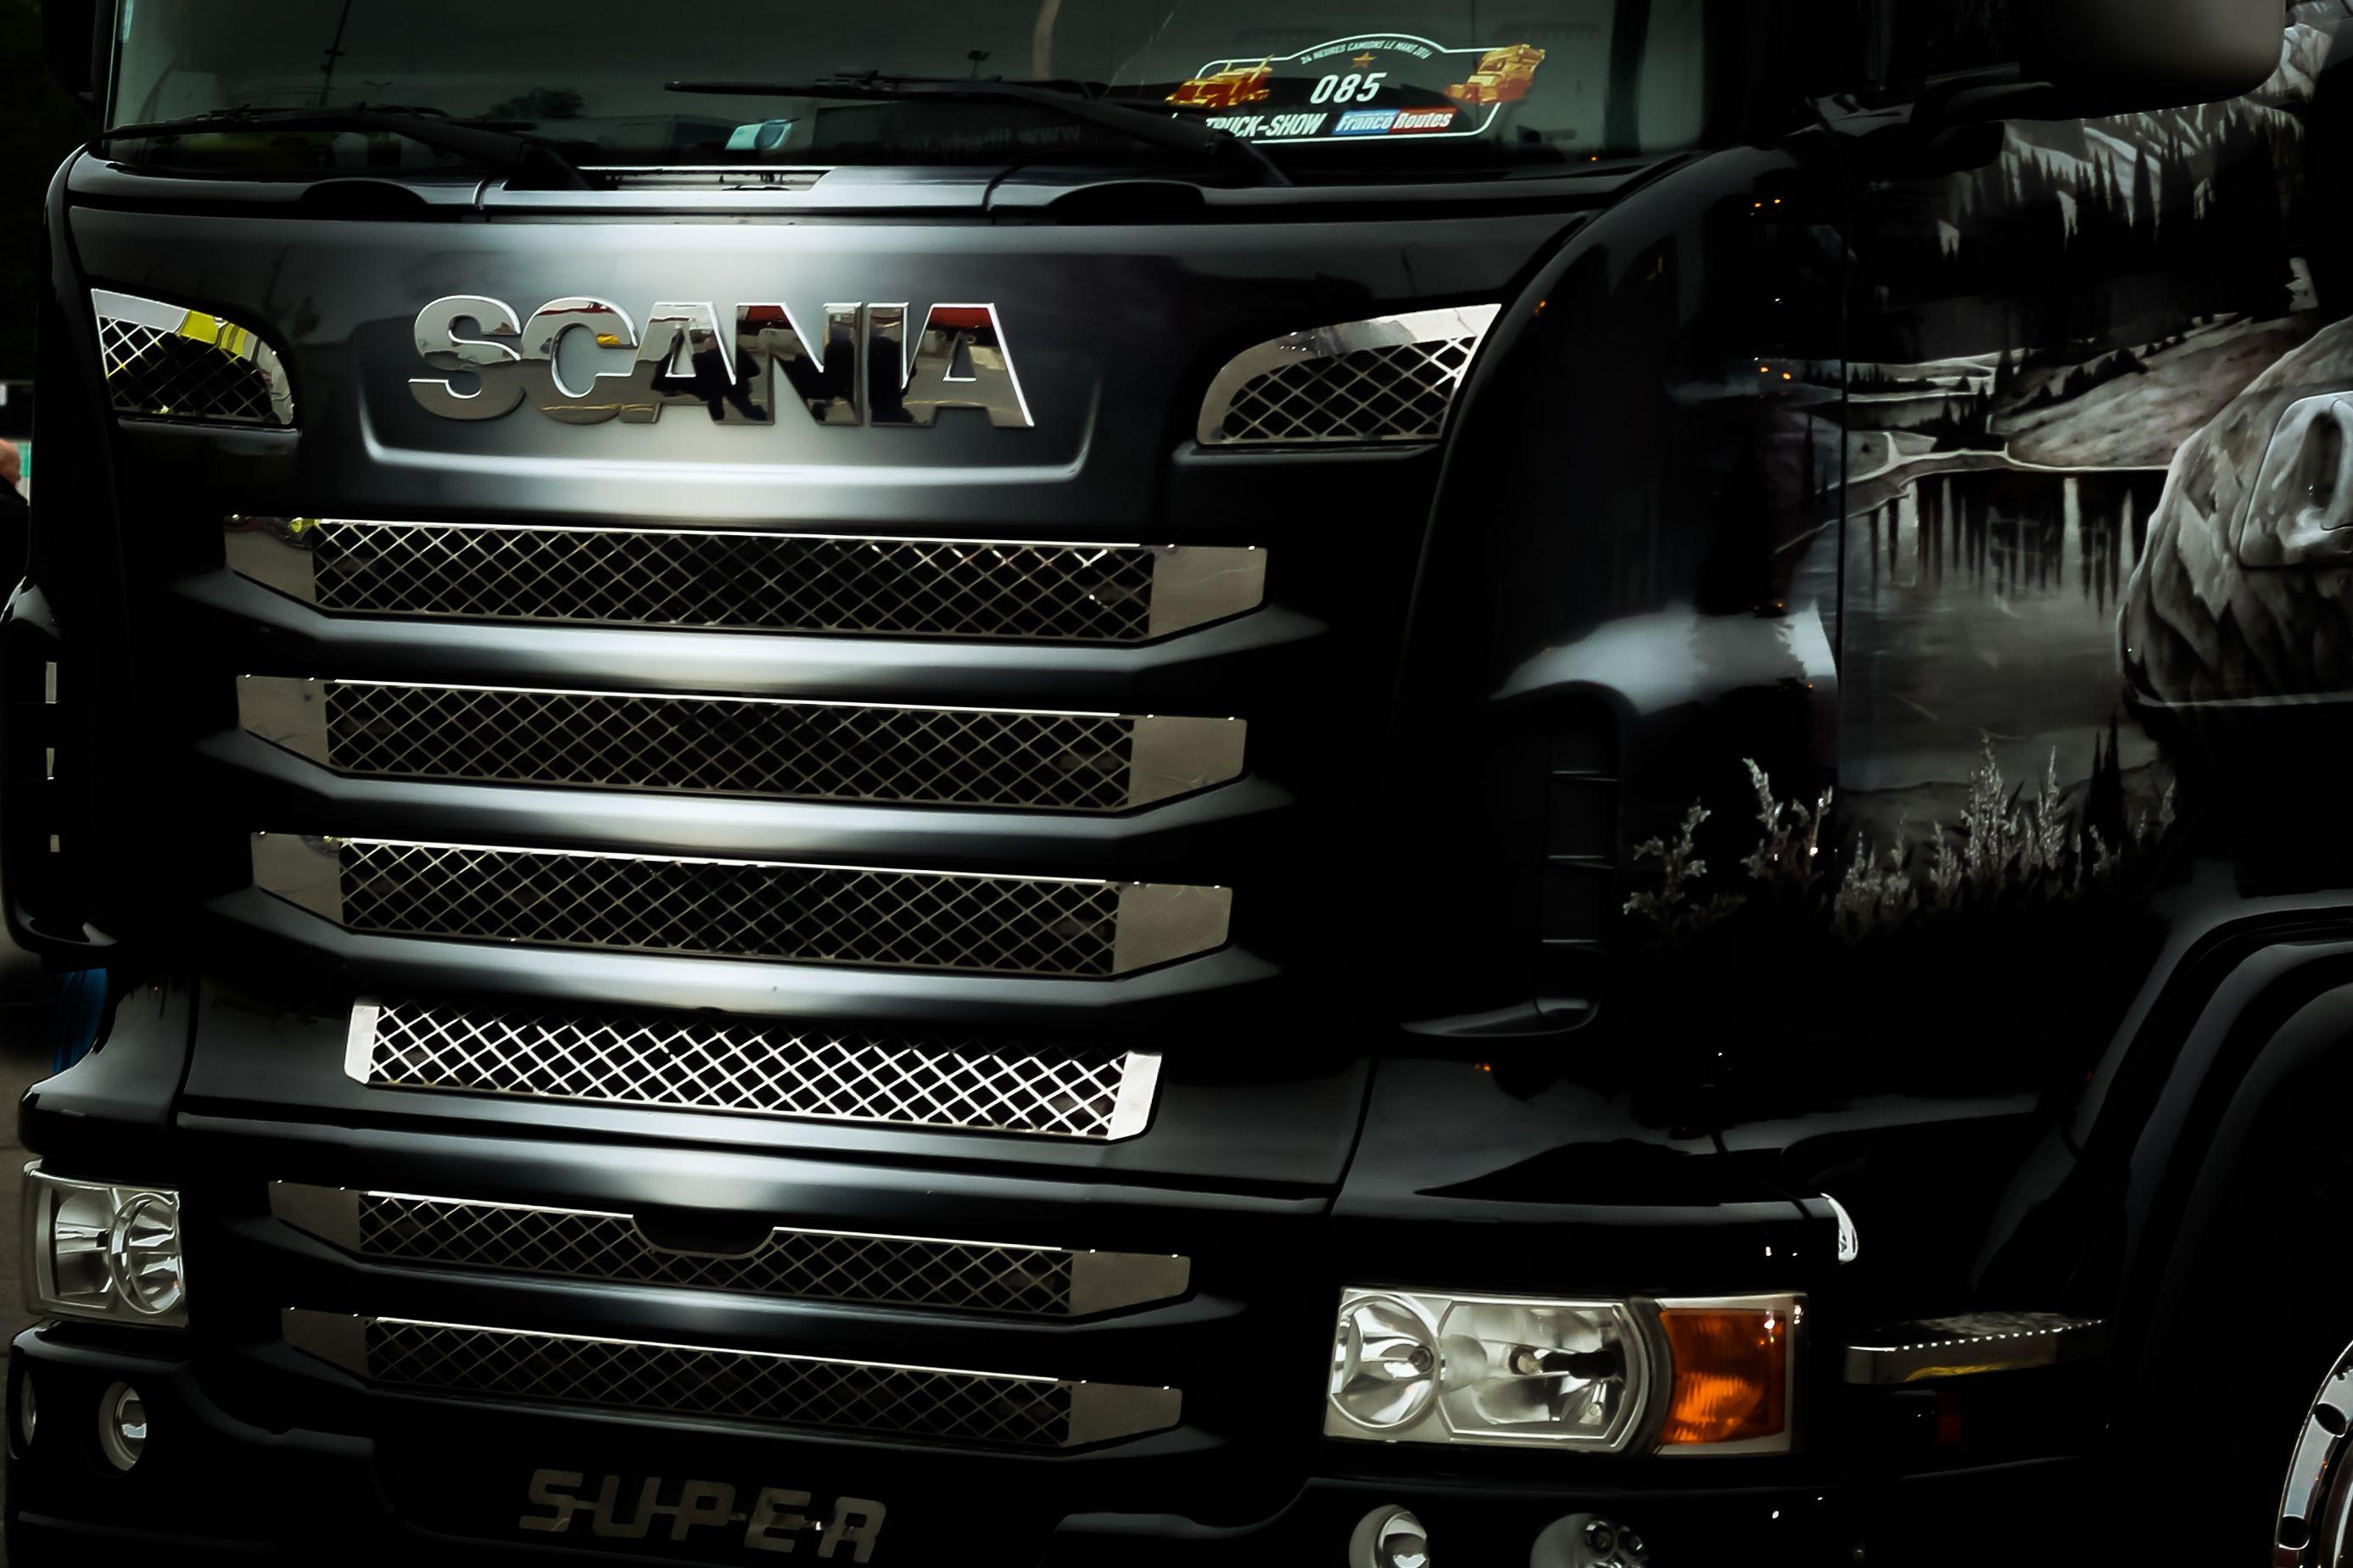 Scania Wallpaper High .truck Picture Free.com